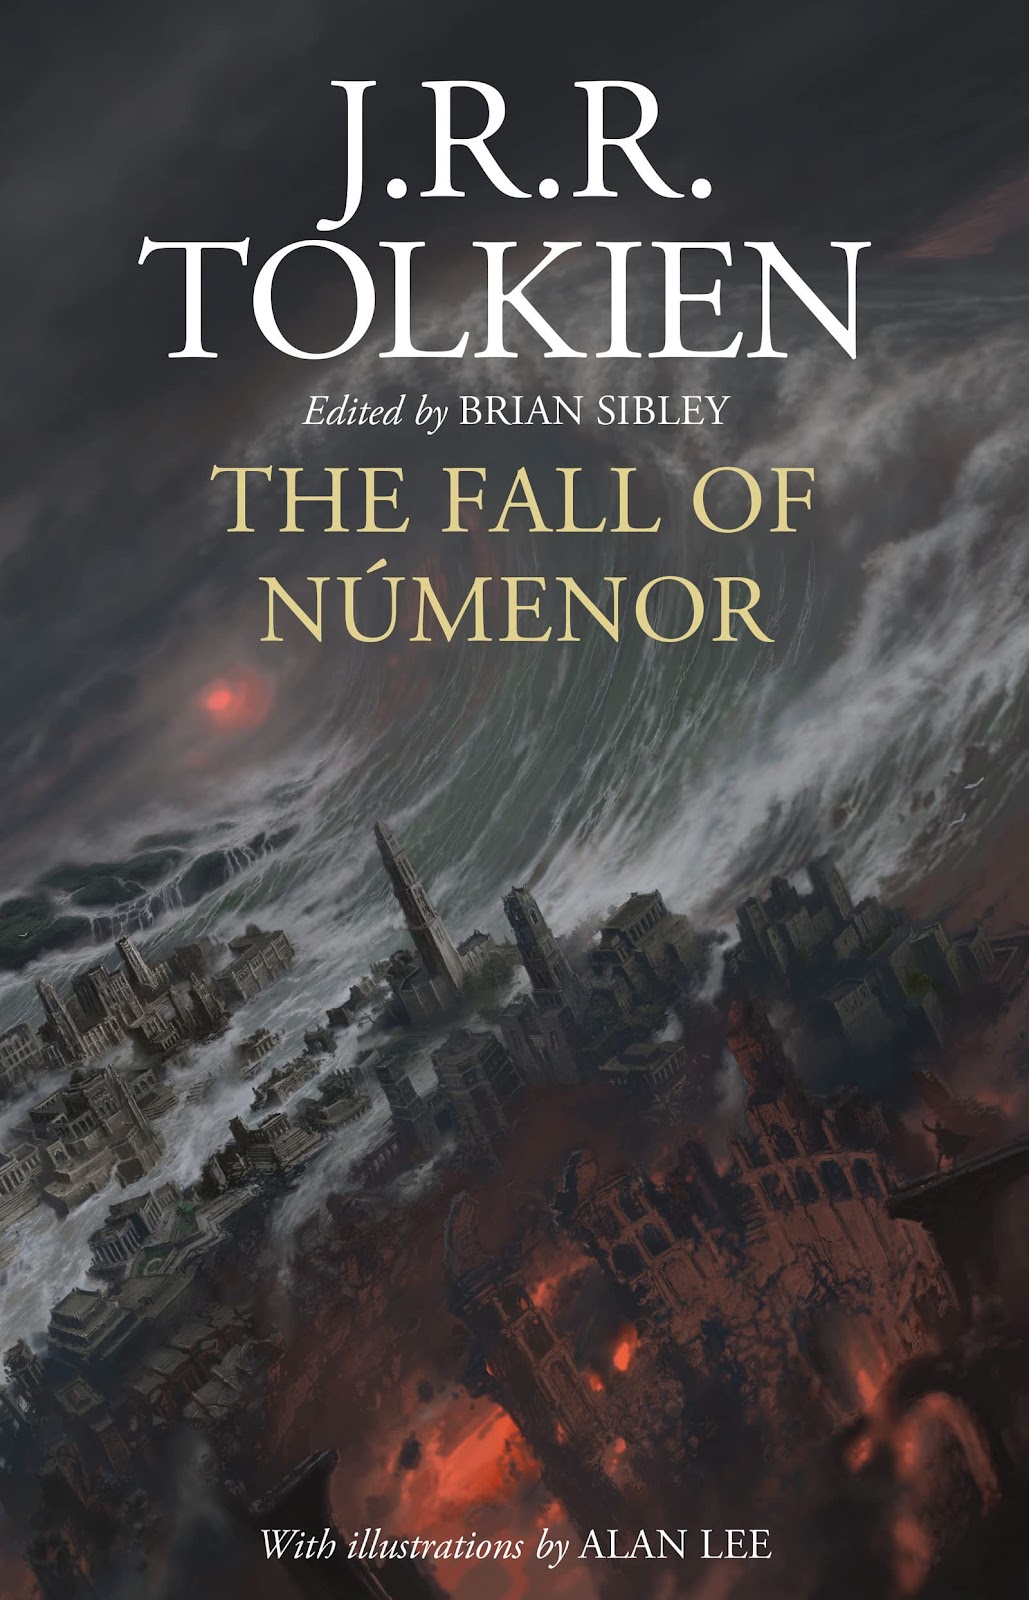 The Fall of Numenor by J. R. R. Tolkien